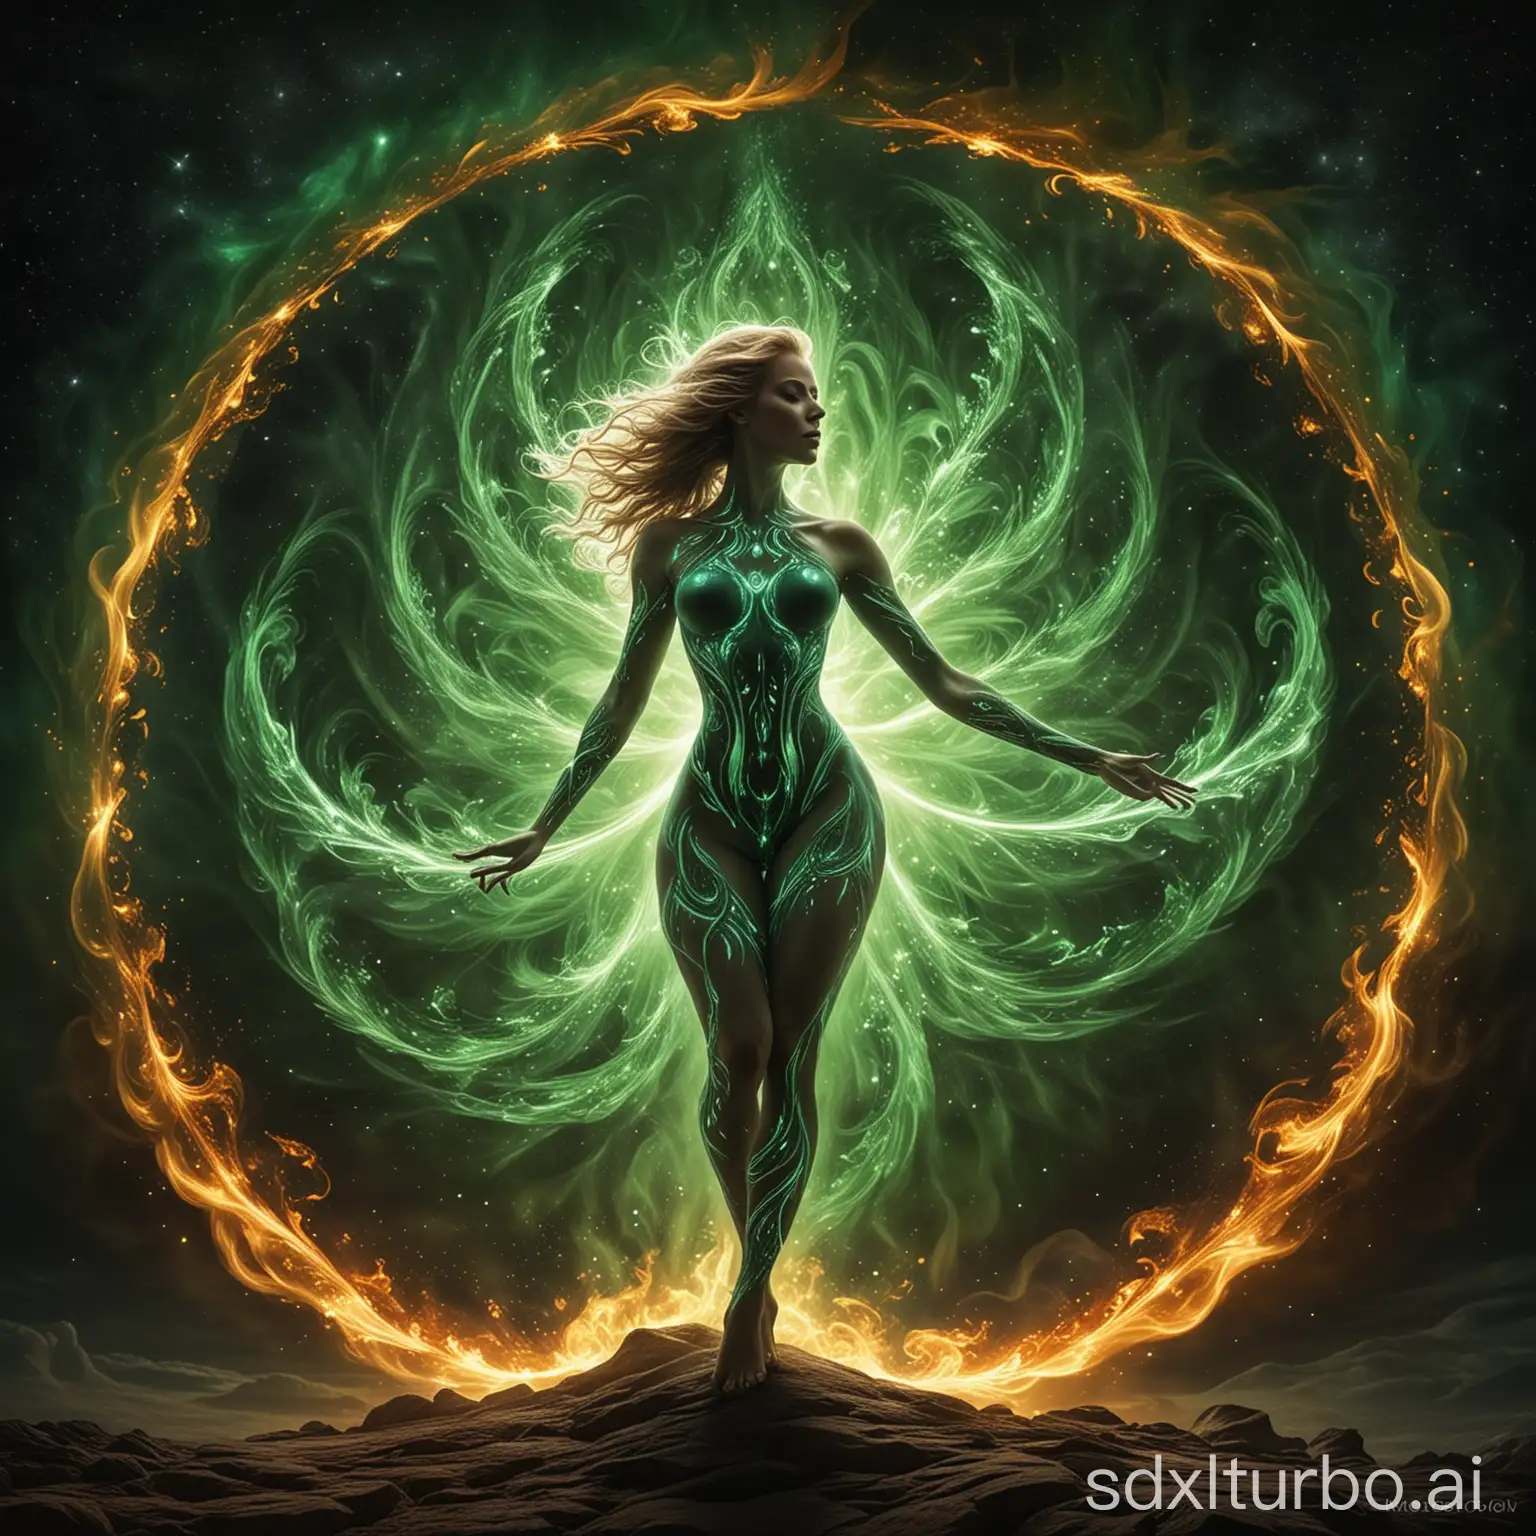 create an image of The cosmic dancer in 'Fractal Flames', encircled by the aurora green mesmerizing, complex, and polaris white self-similar patterns of fire, with a dance of light, heat, and energy.  Fiery Flames, Glowwave